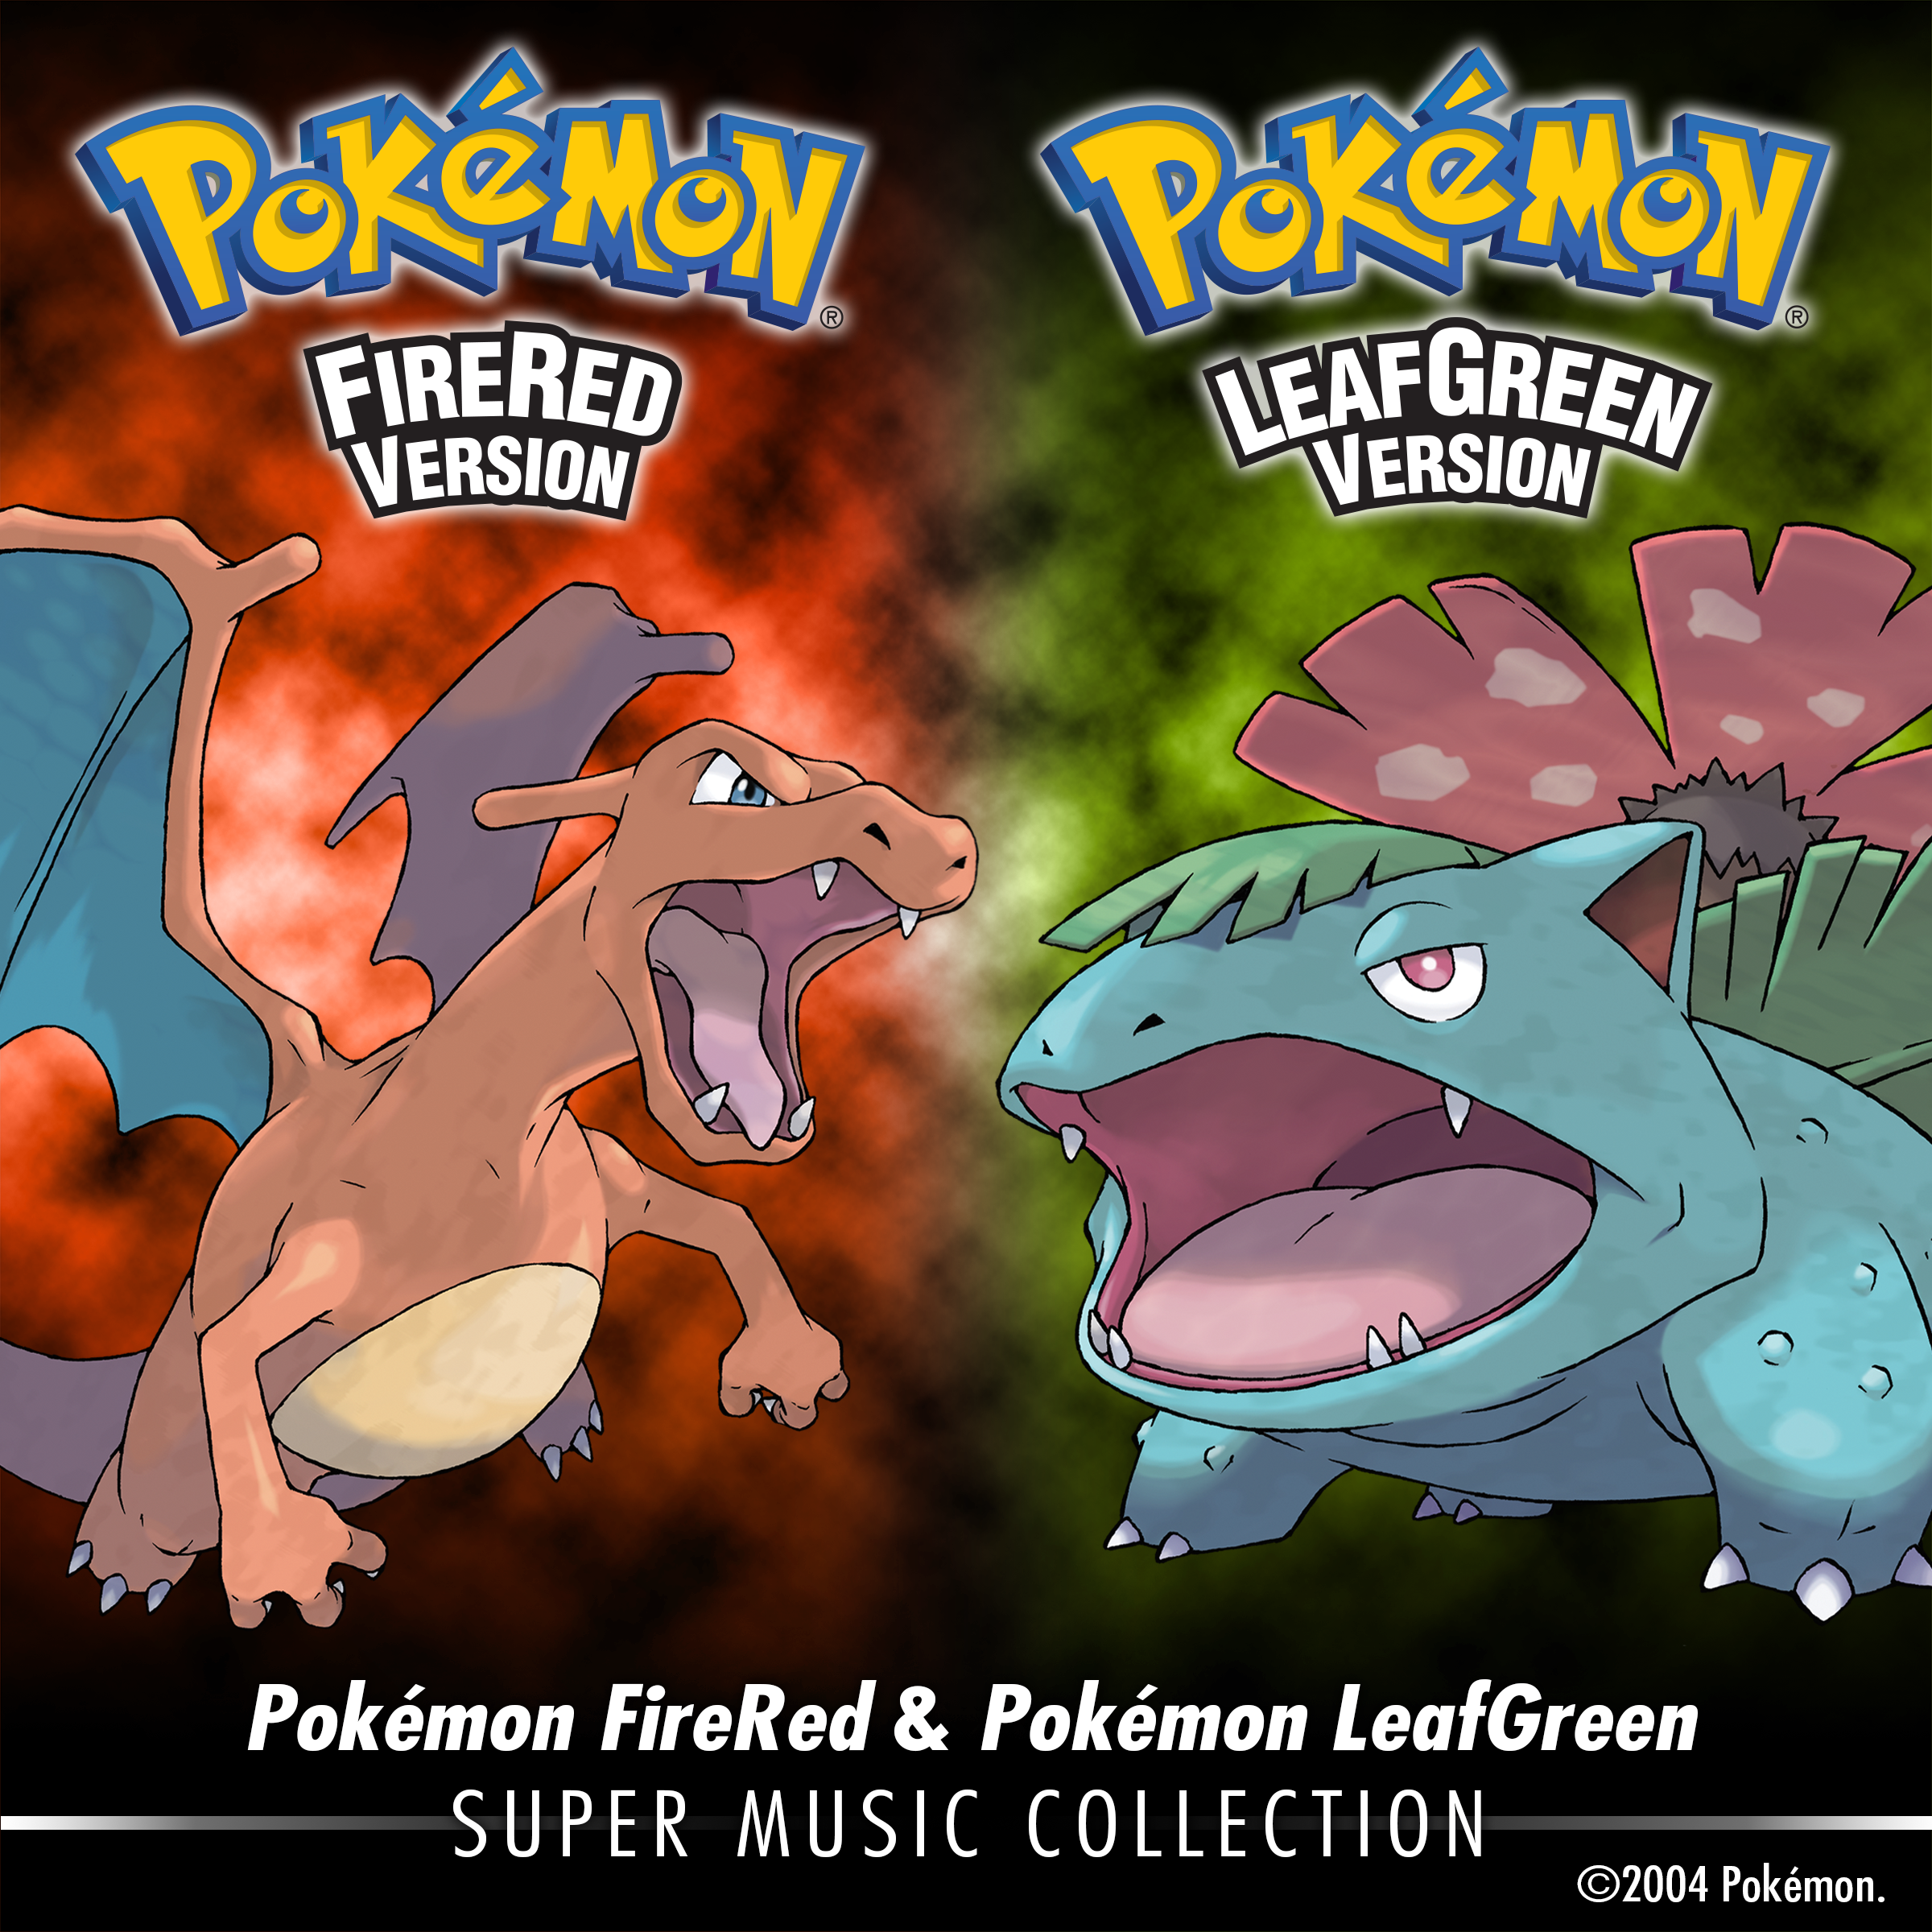 PR: Soundtracks of the Pokémon Fire Red and Pokémon Leaf Green video games launch today on iTunes